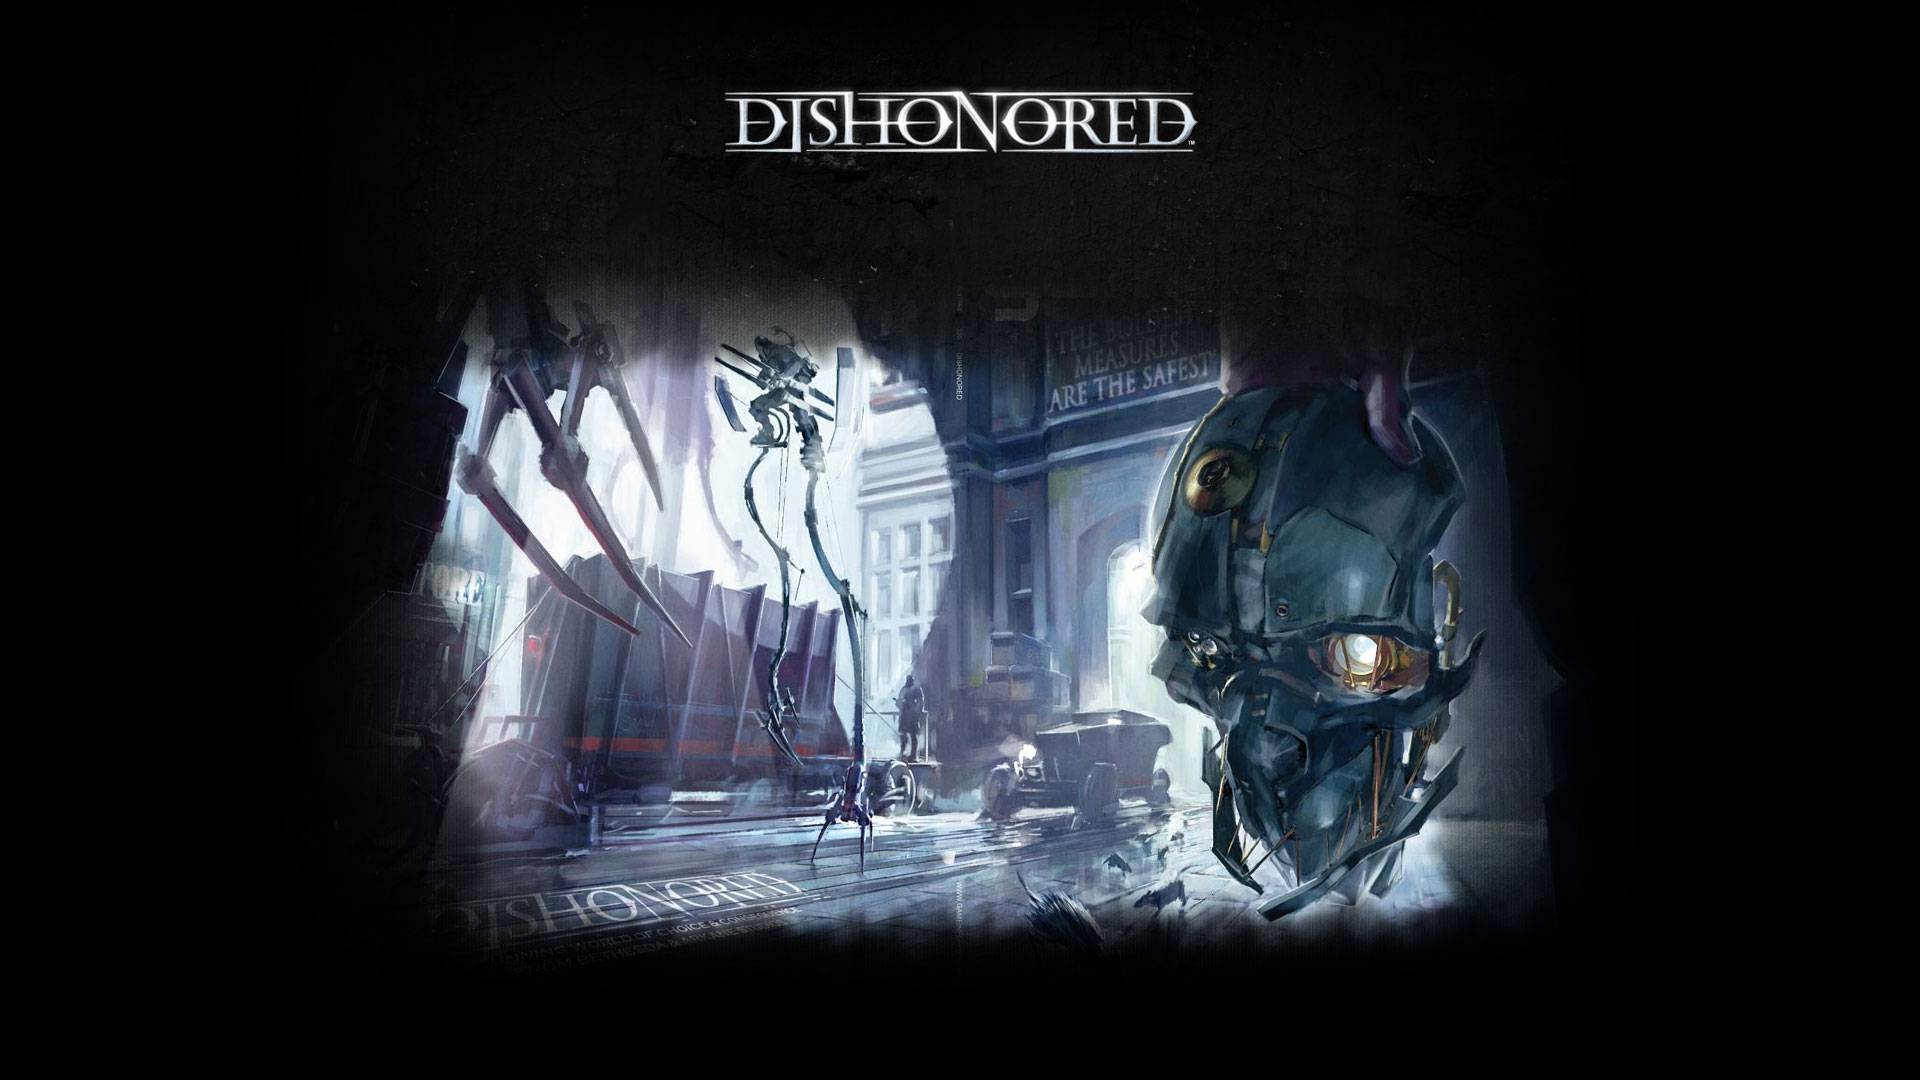 Dishonored Wallpaper in HD